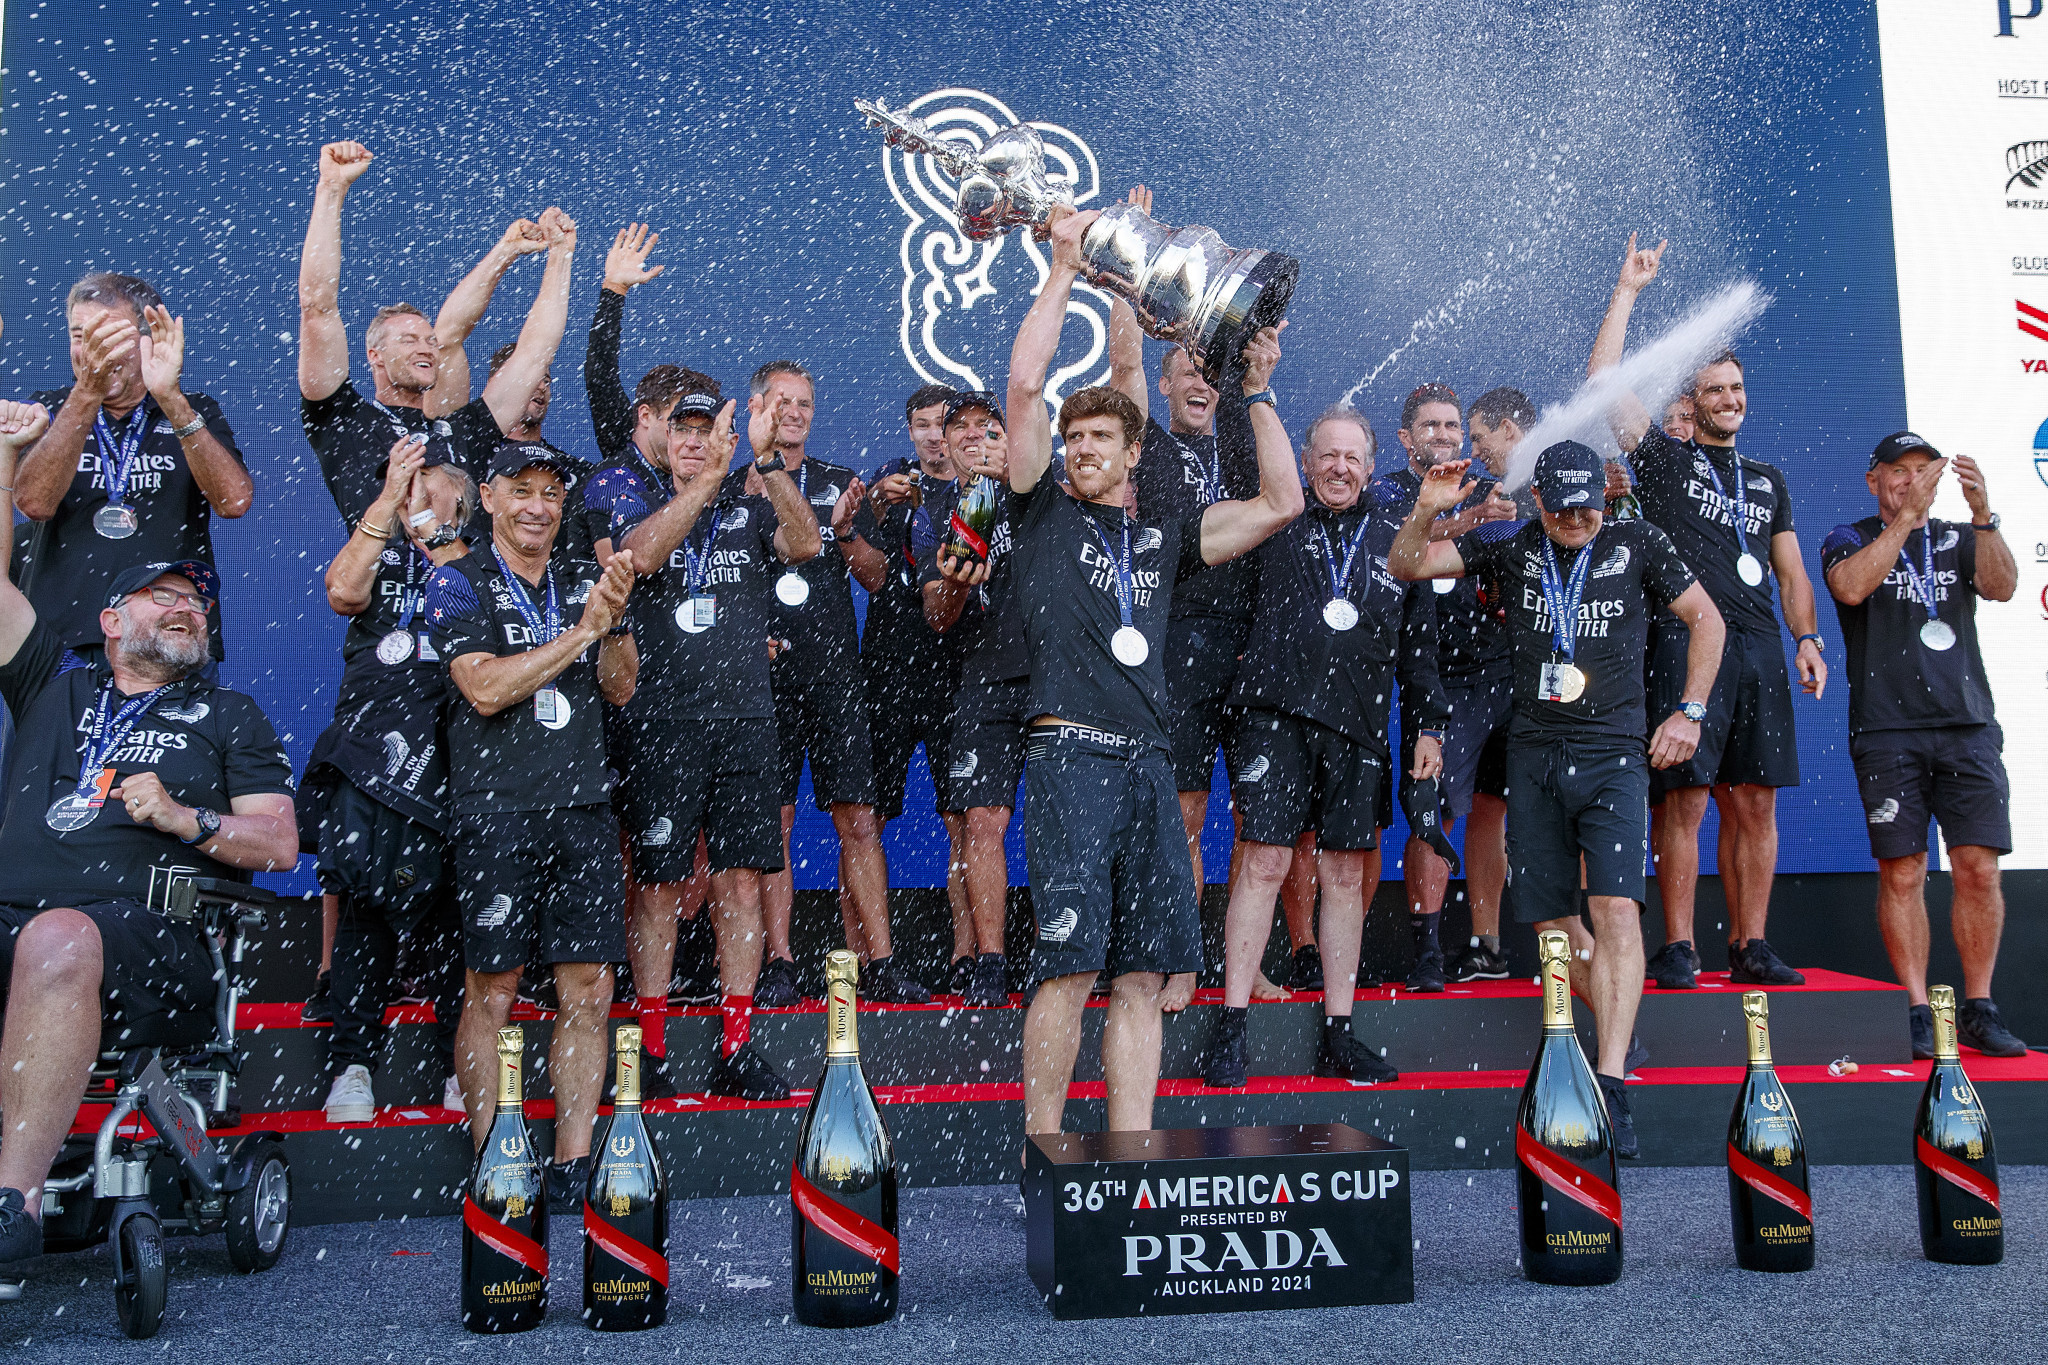 Emirates Team New Zealand retained the America's Cup in March last year ©Getty Images